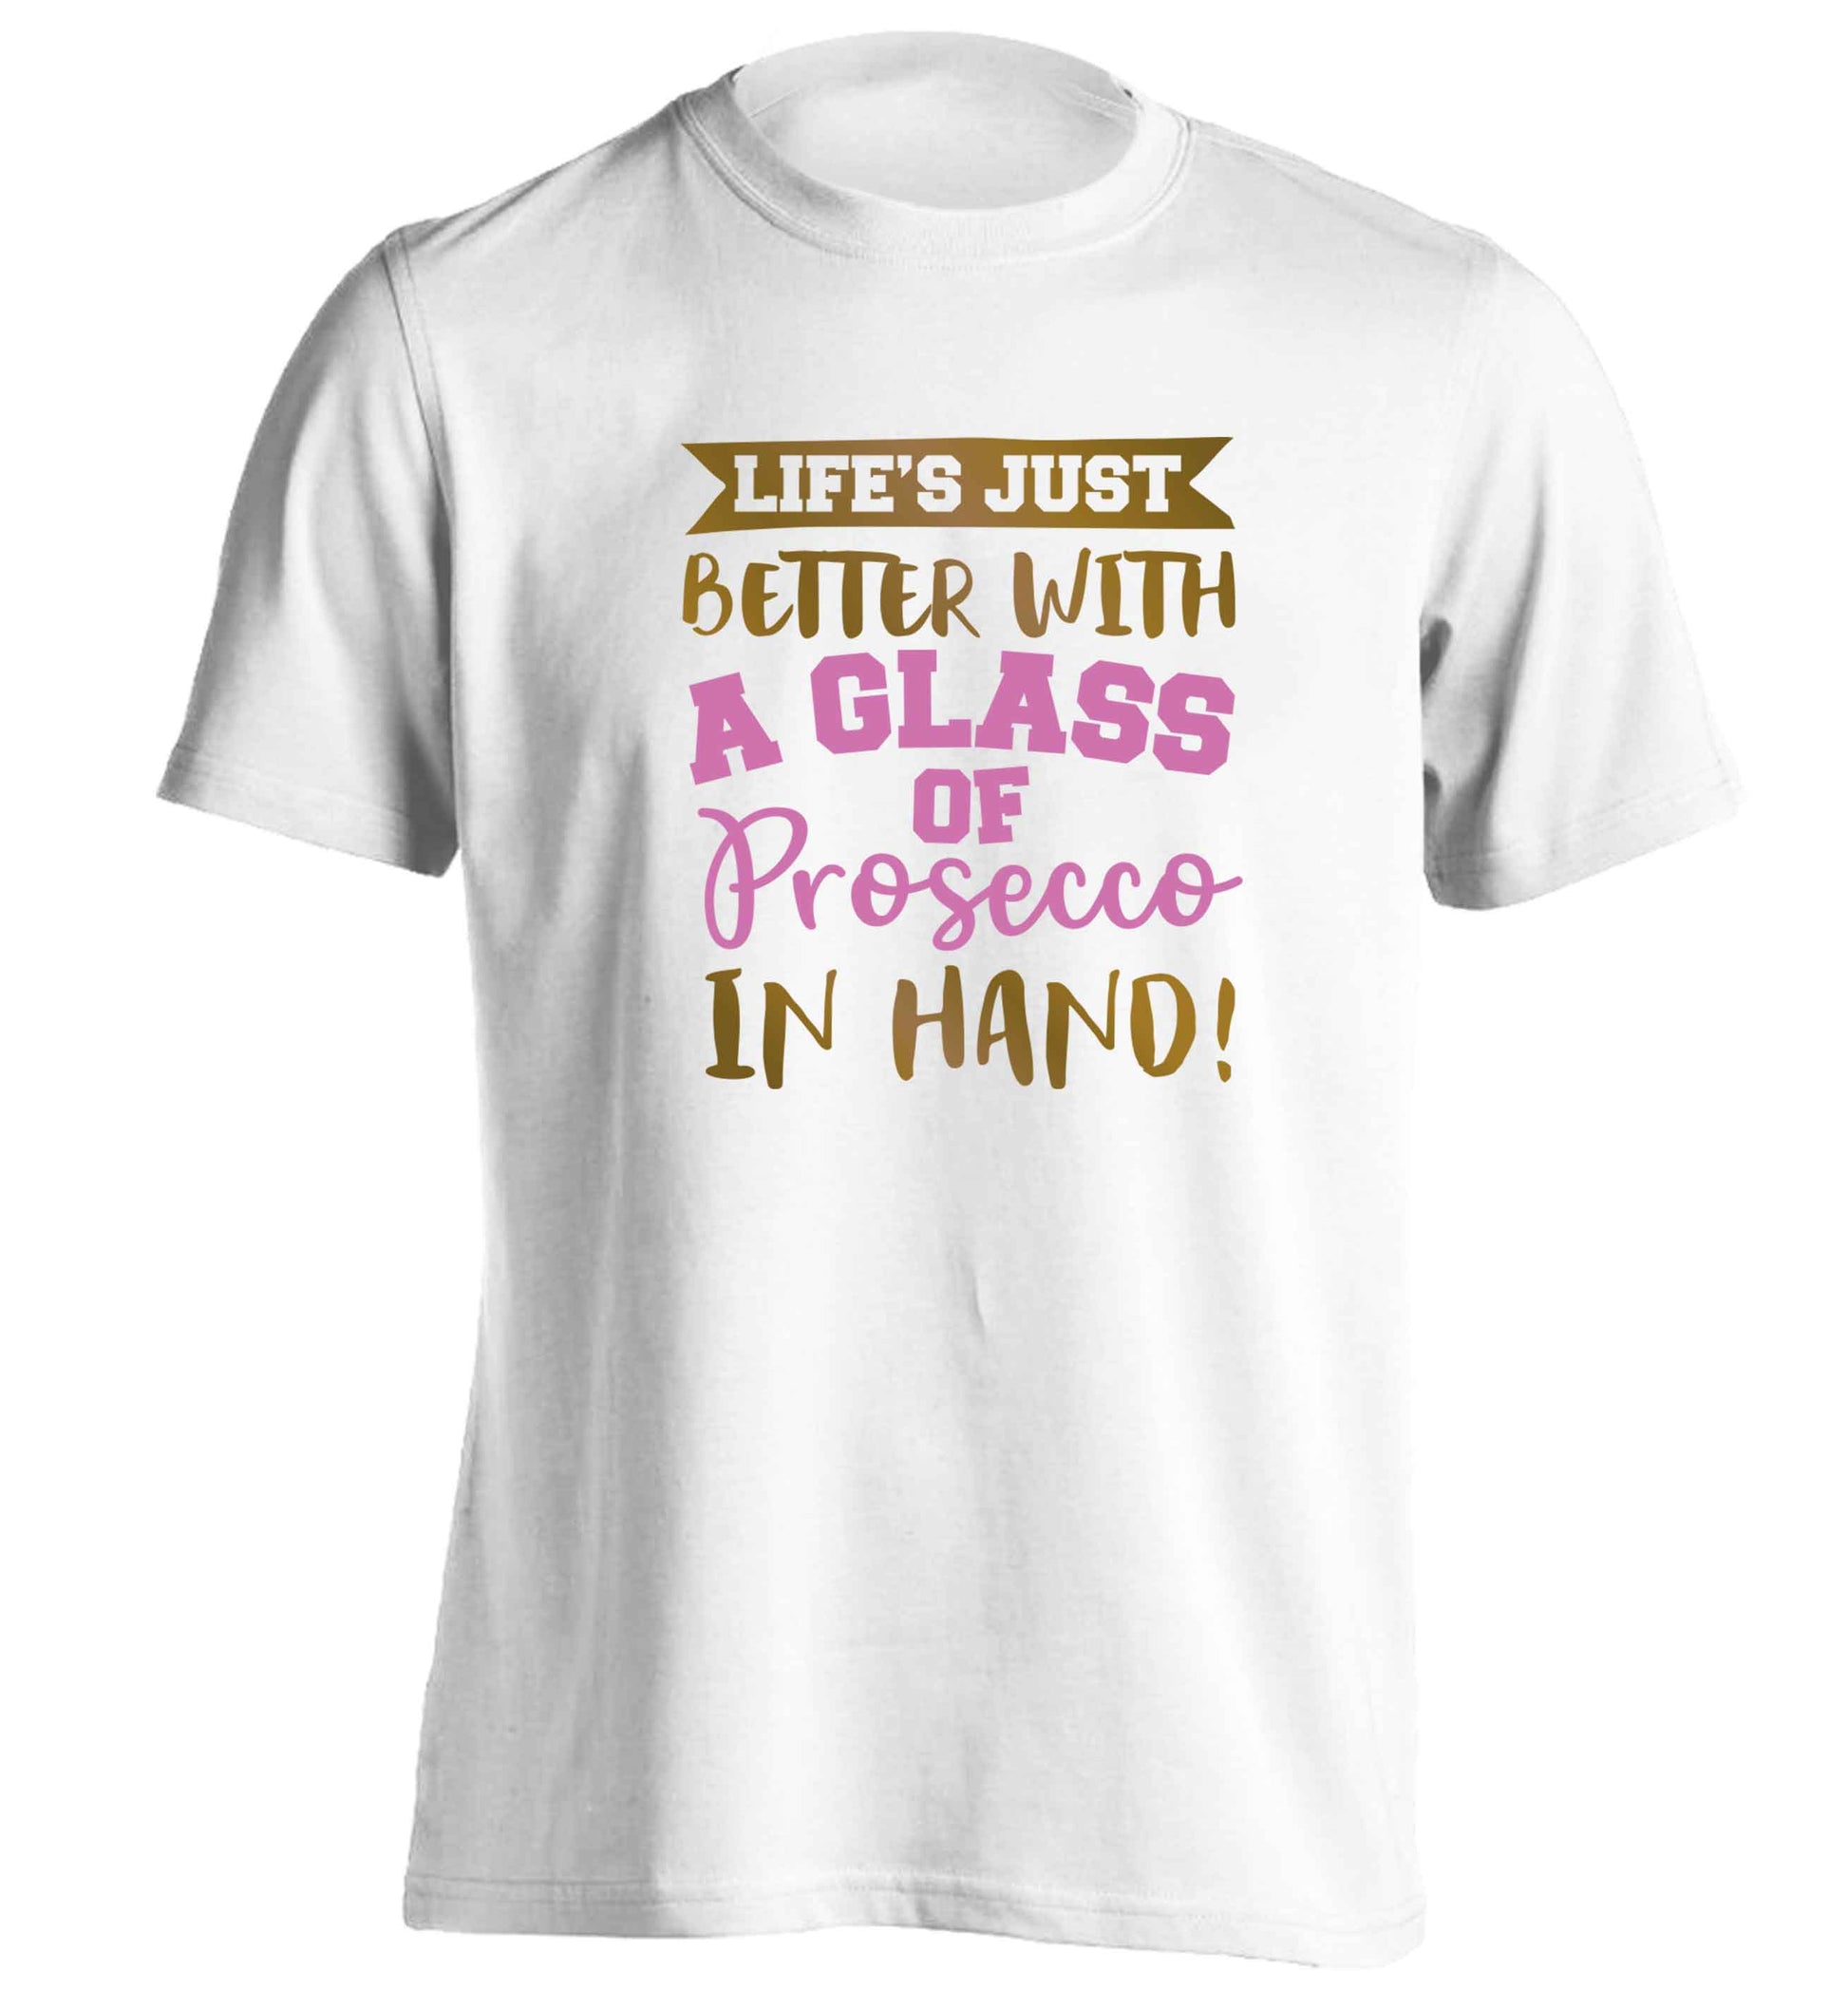 Life's just better with a glass of prosecco in hand adults unisex white Tshirt 2XL